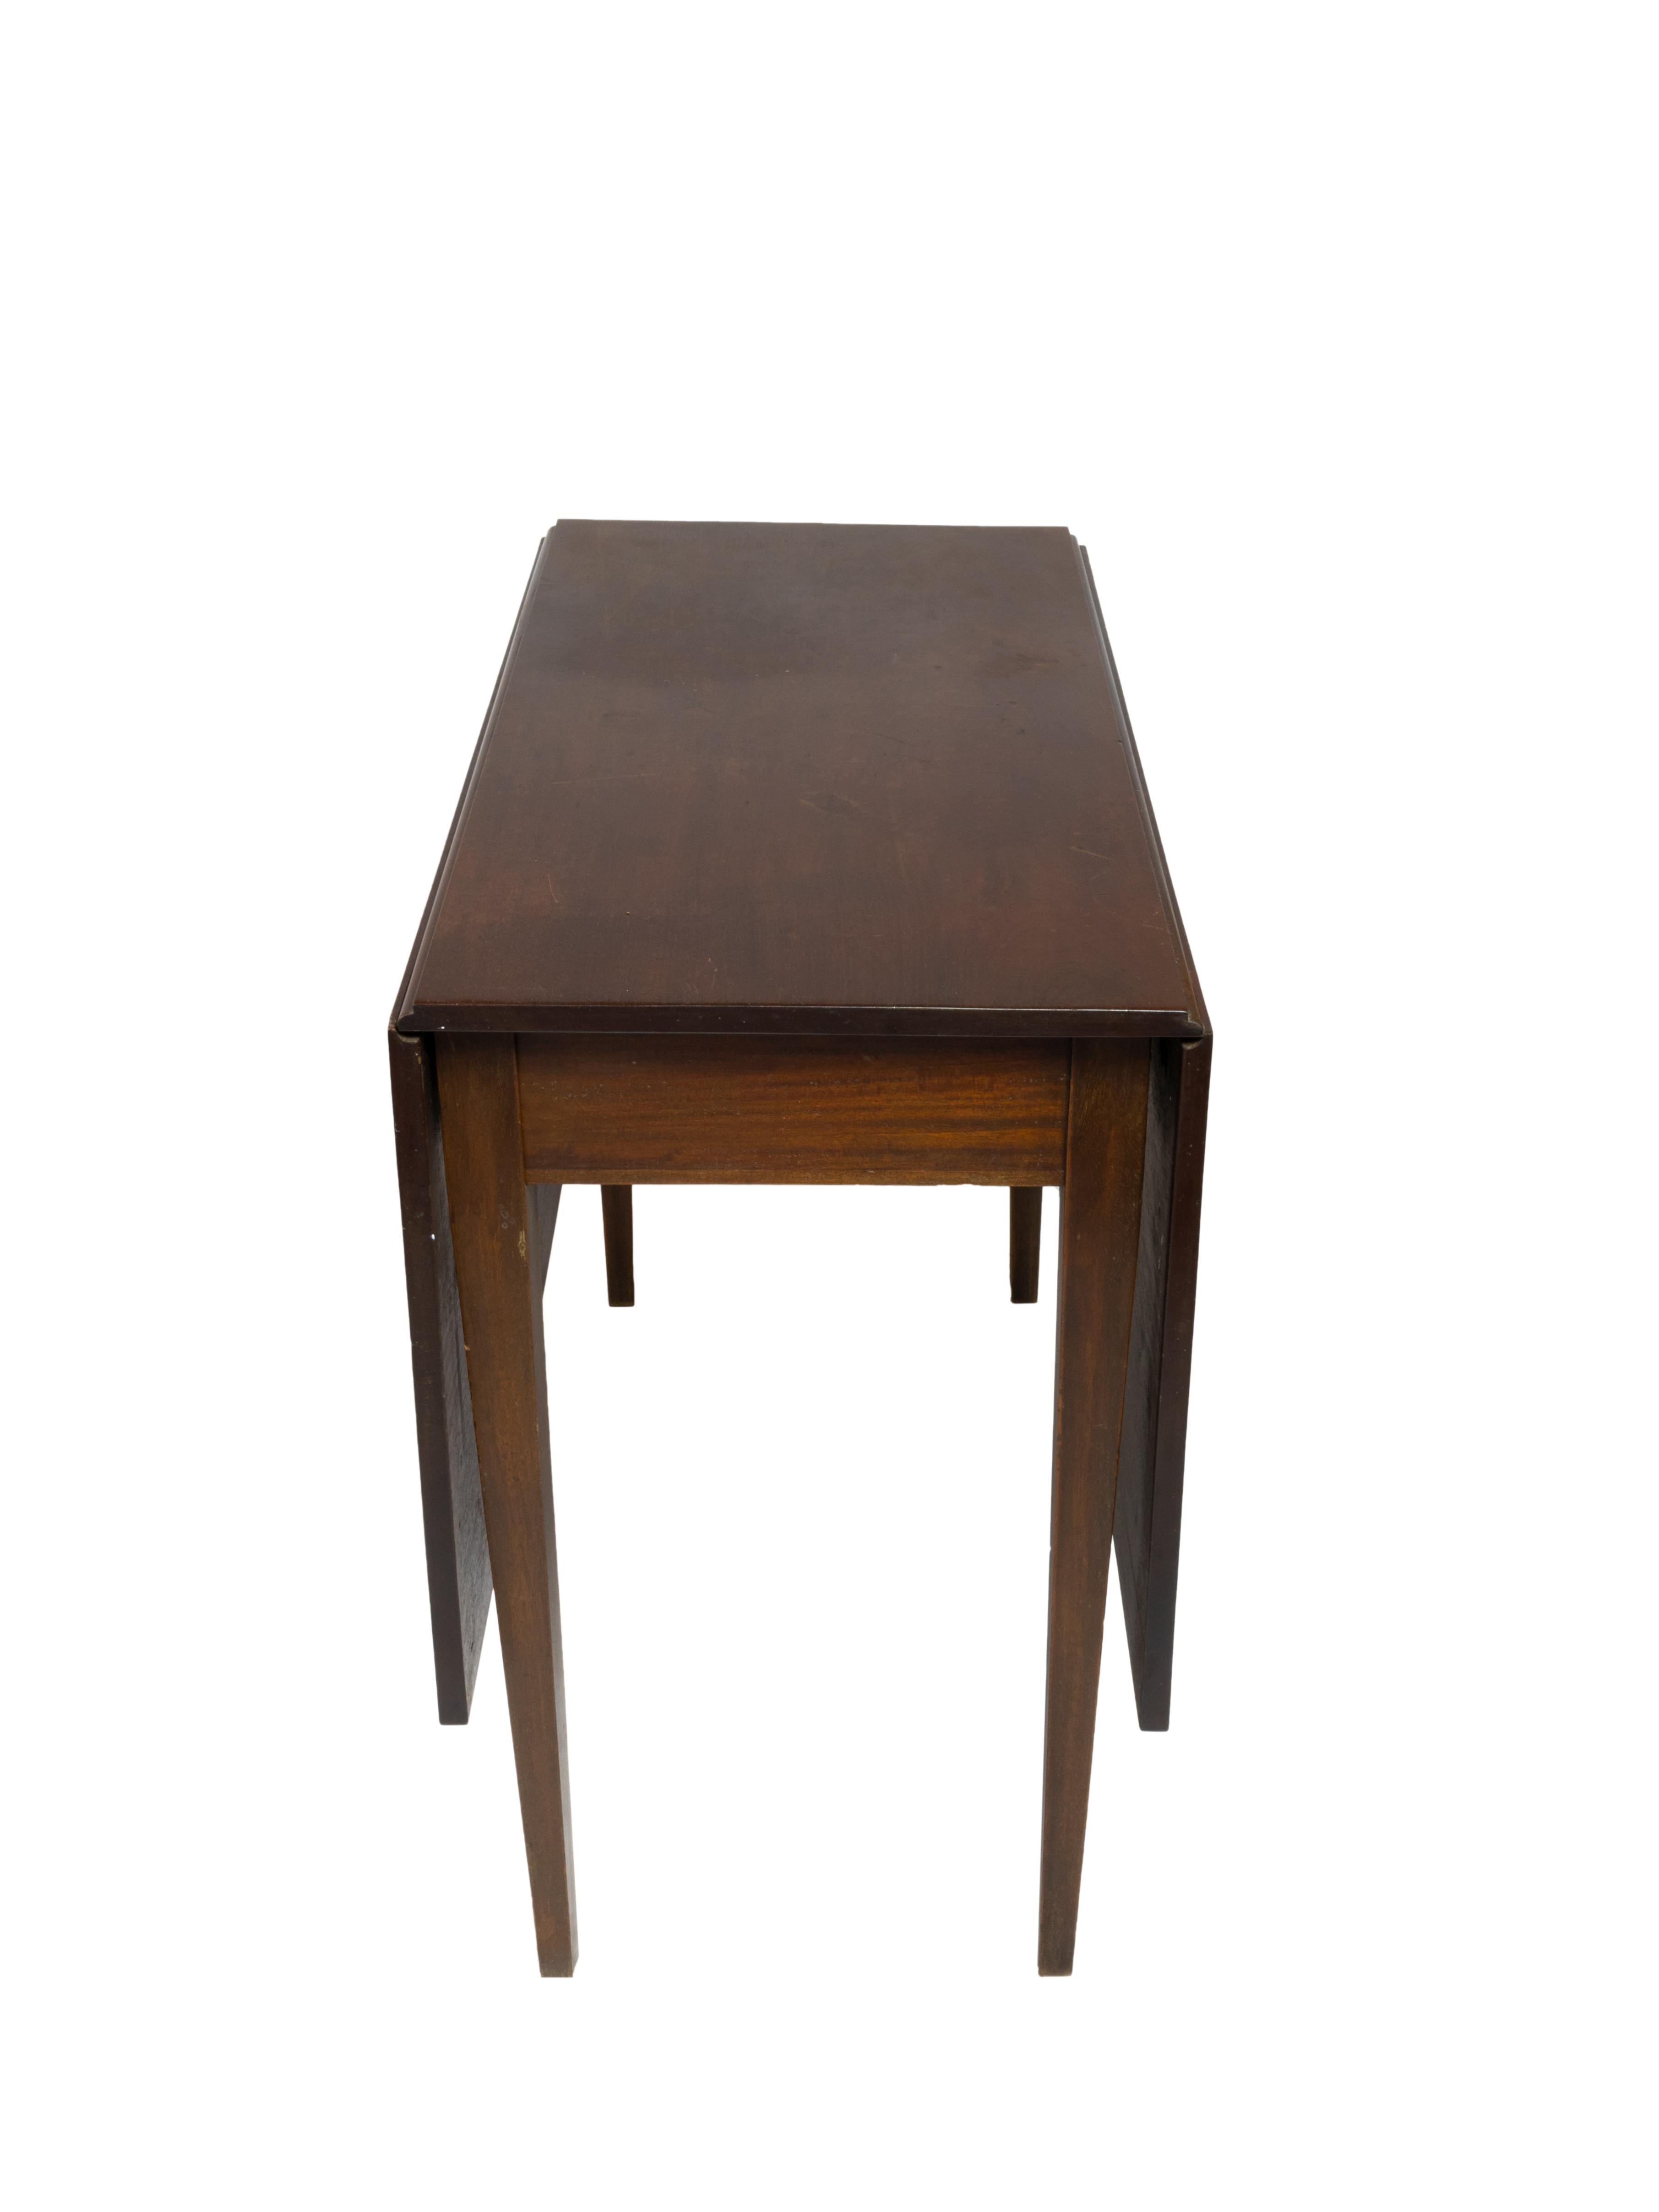 English Hepplewhite Drop Leaf Table, 19th Century For Sale 4